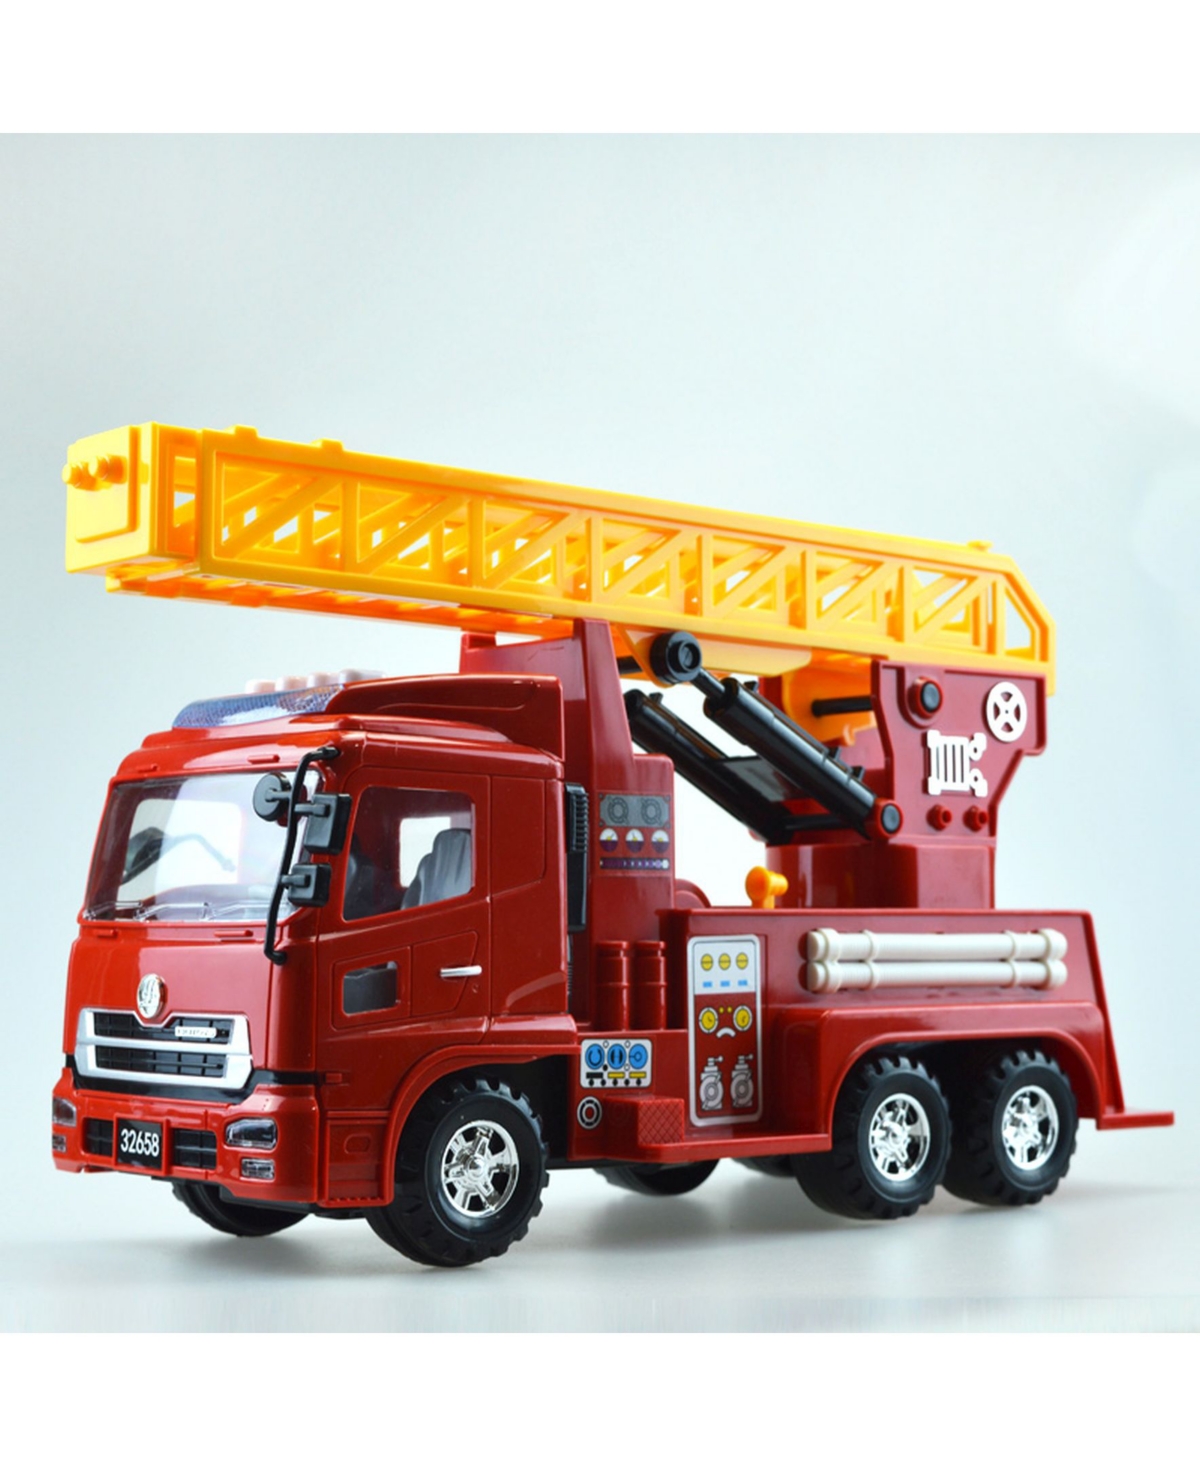 Shop Big Daddy Mag-genius  Large Fire Truck With Lights And Sound Toy In Multi